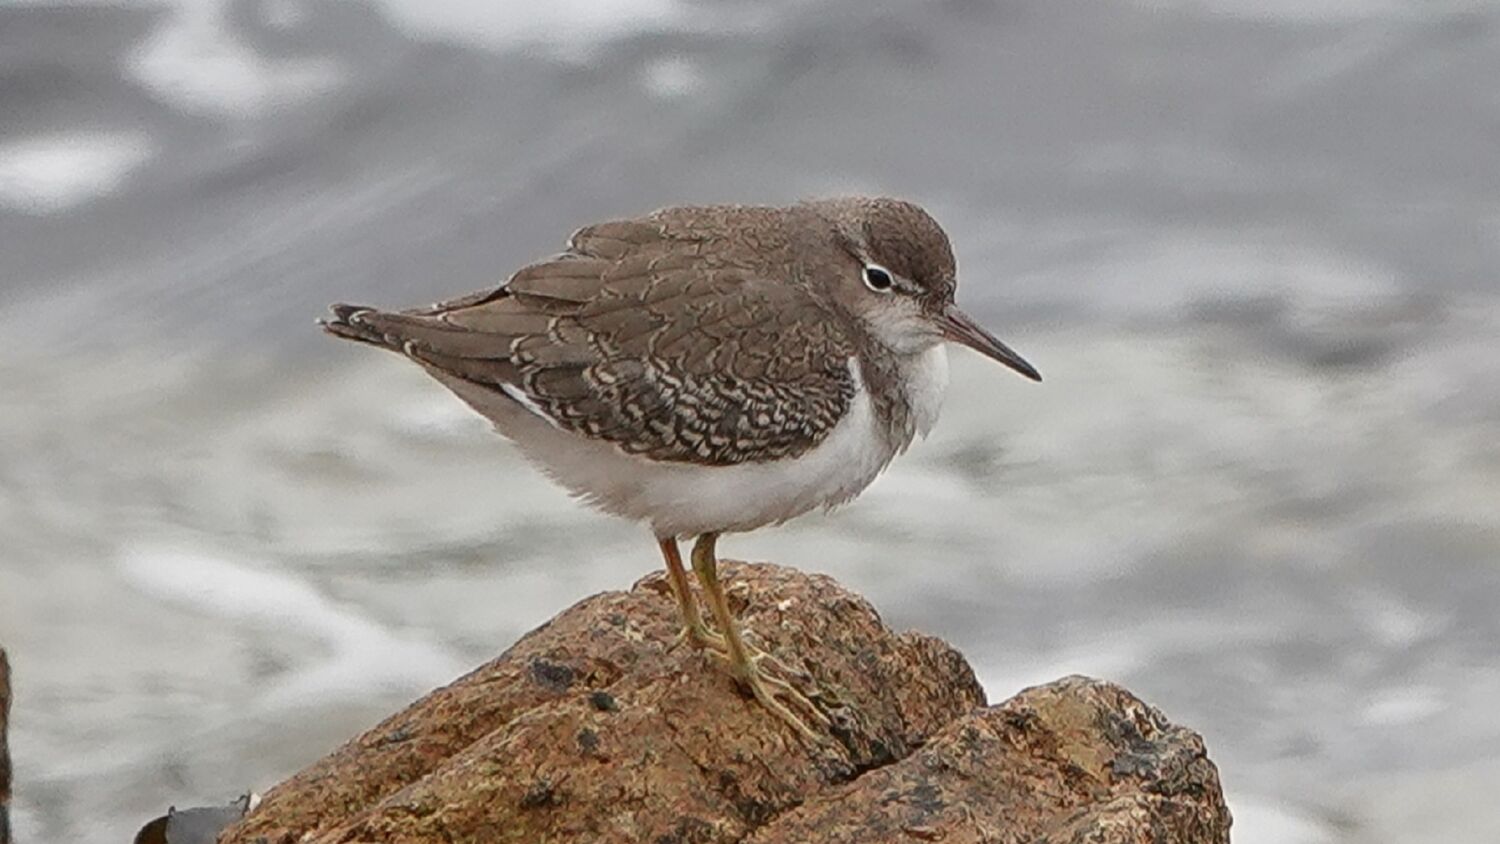 A small sandpiper bird perches on a rock by the edge of the sea. It has a very round body, with brown upper feathers and a white tummy. It has a very short tail and yellow legs.